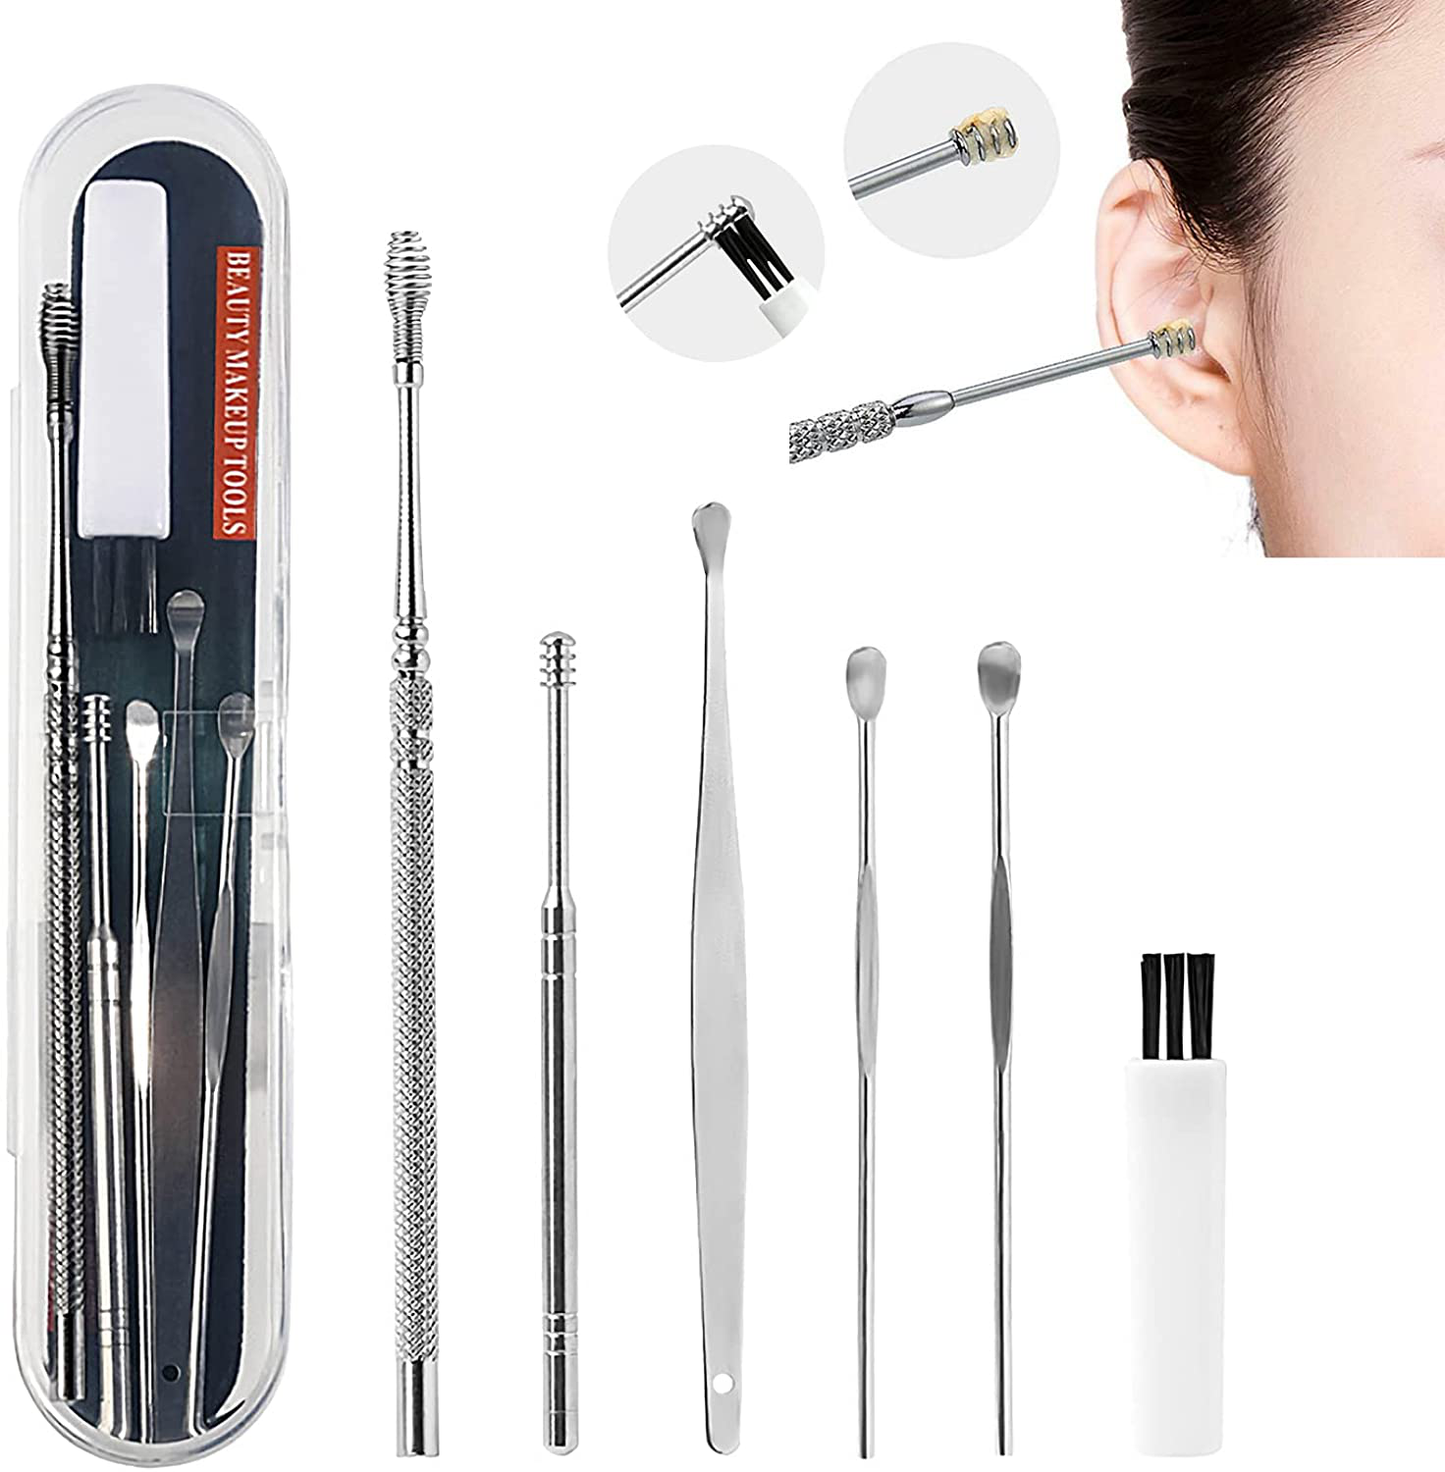 8 Pcs Innovative Spring Ear Wax Cleaner Tool Set, Stainless Steel Ear Wax Removal Kit Cleaning Tool Earwax Pick Cleaner Curette Spoon Set Tool with a Cleaning Brush and Storage Box